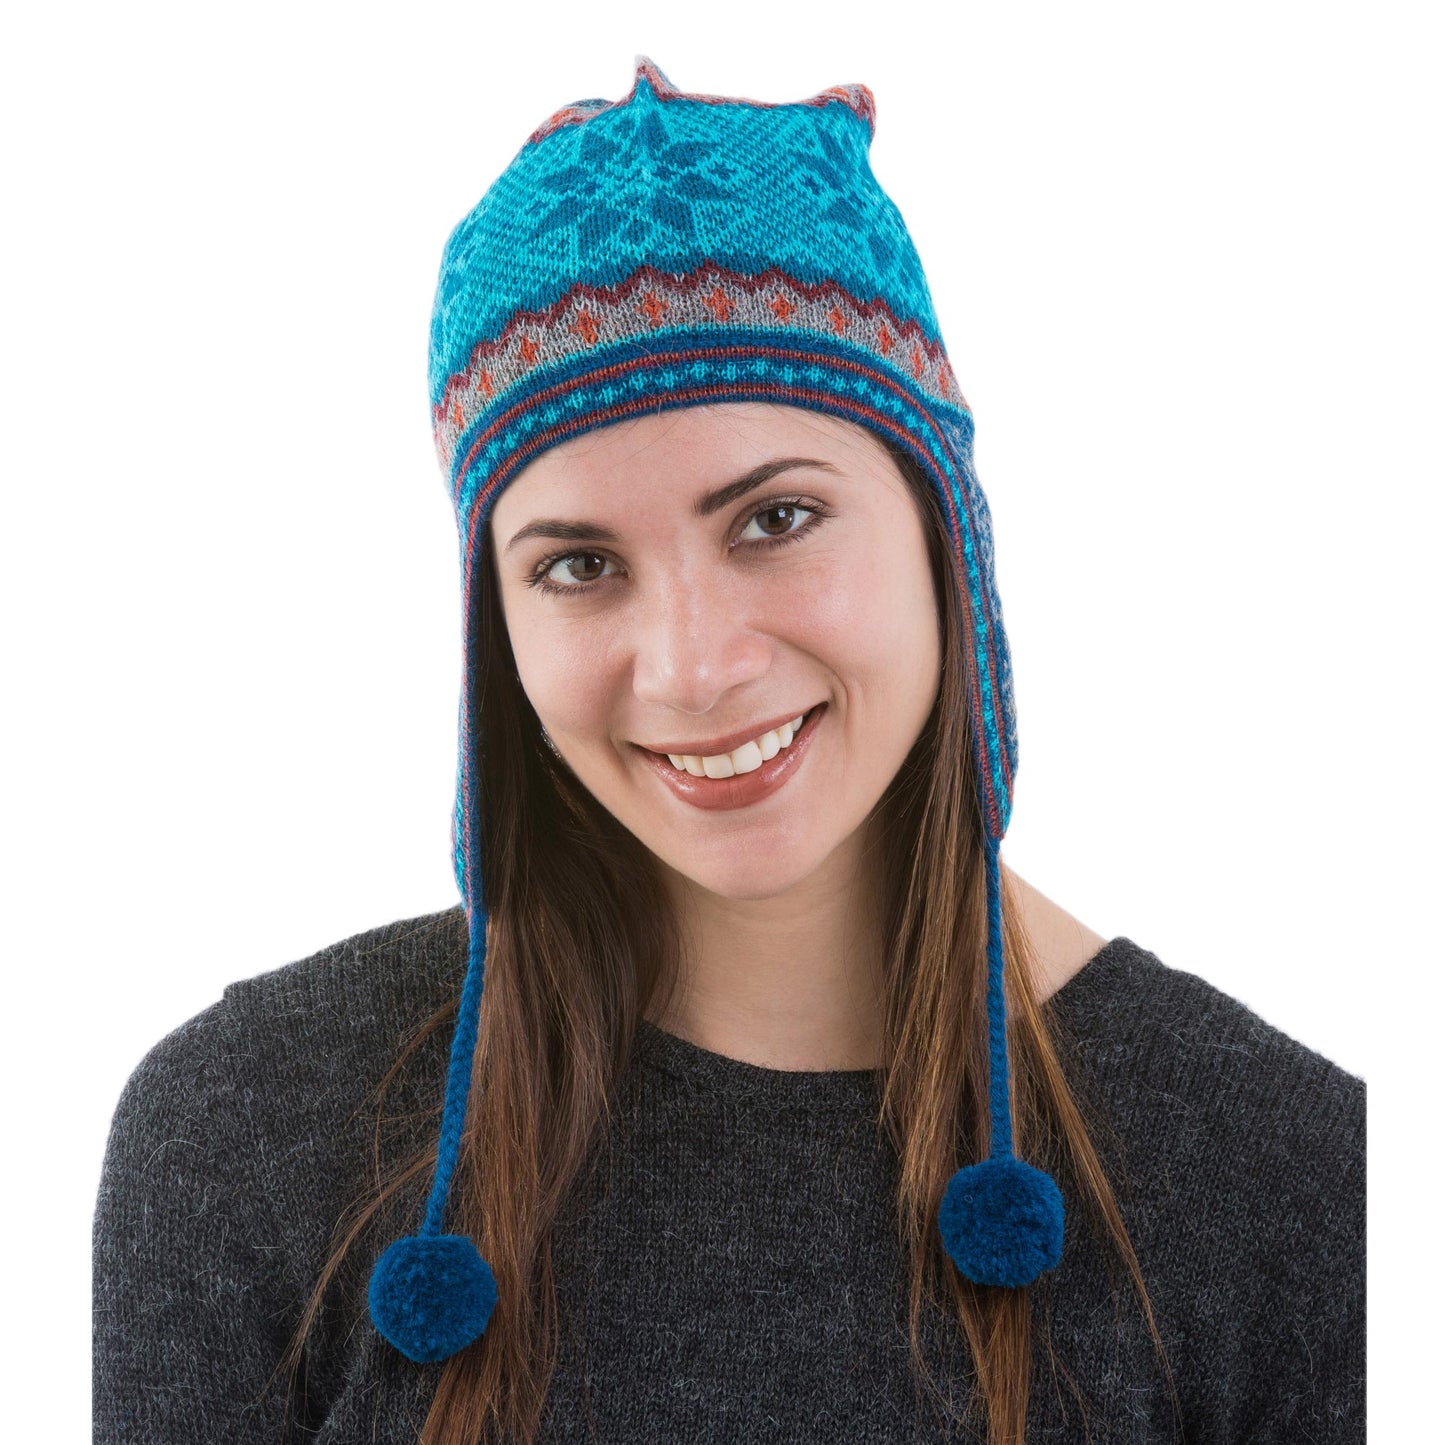 Andean Snowfall Alpaca Chullo Hat in Azure and Smoke from Peru